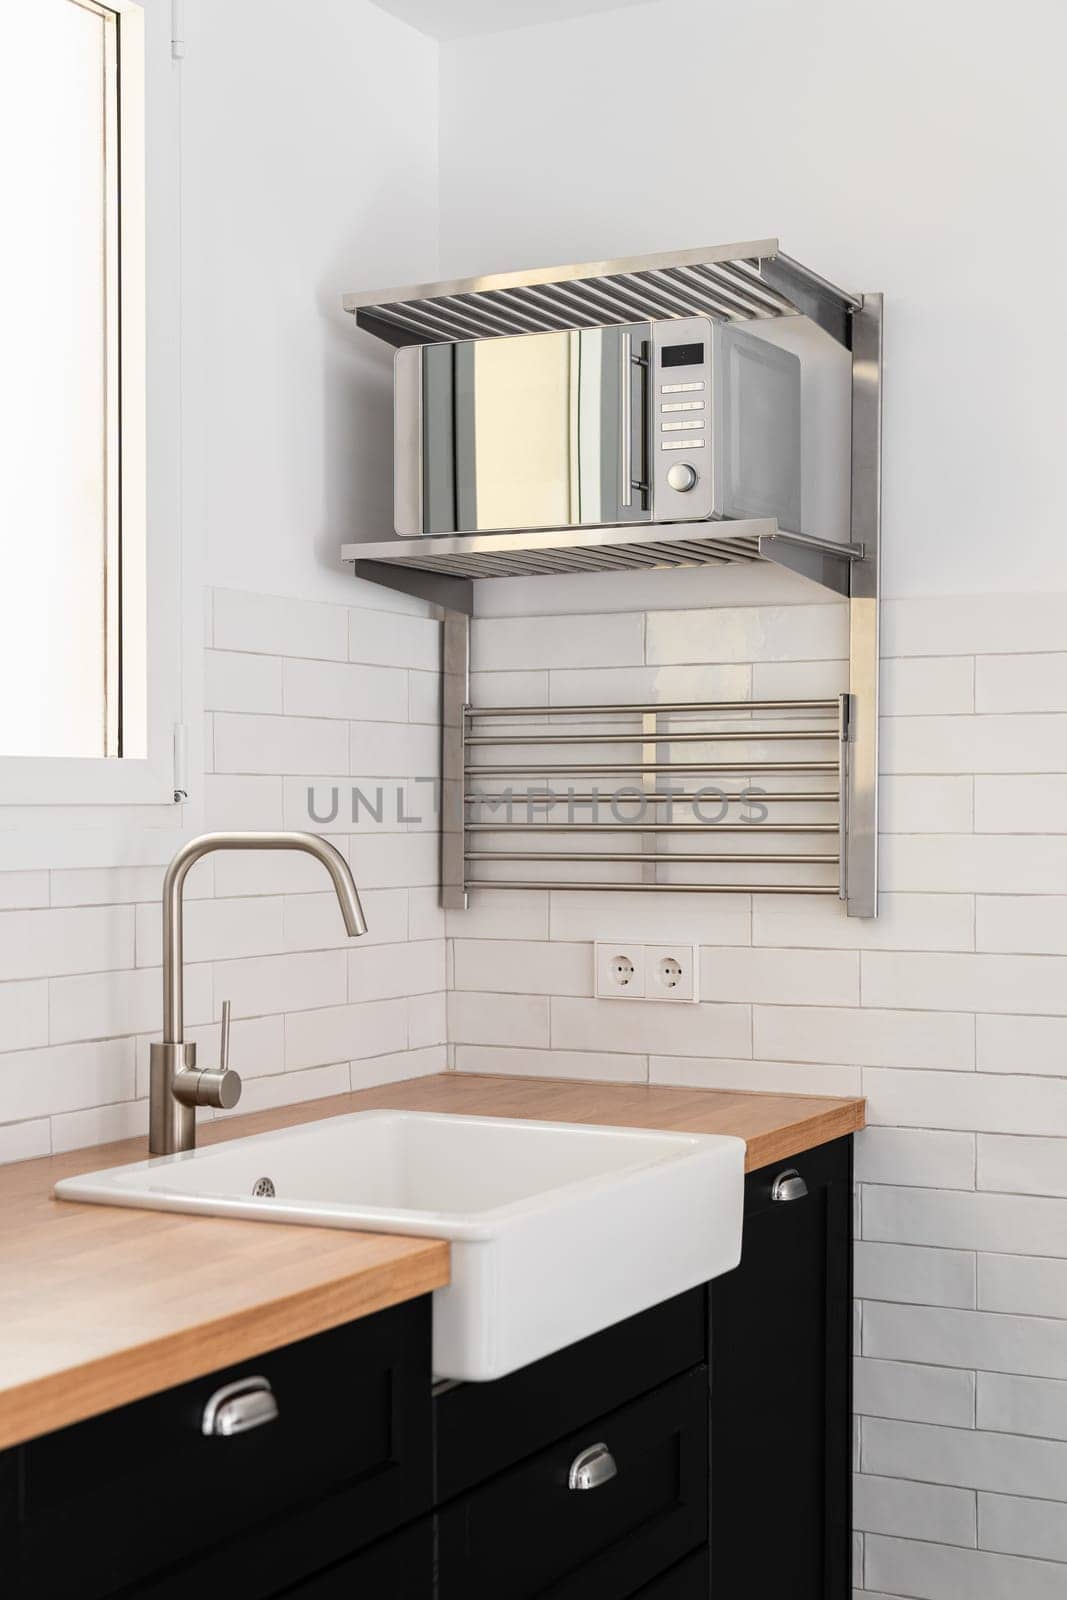 View of a white modern kitchen sink with dark countertops and cabinets and rails and white tiles on window background. The concept of a modern kitchen in a new building by apavlin